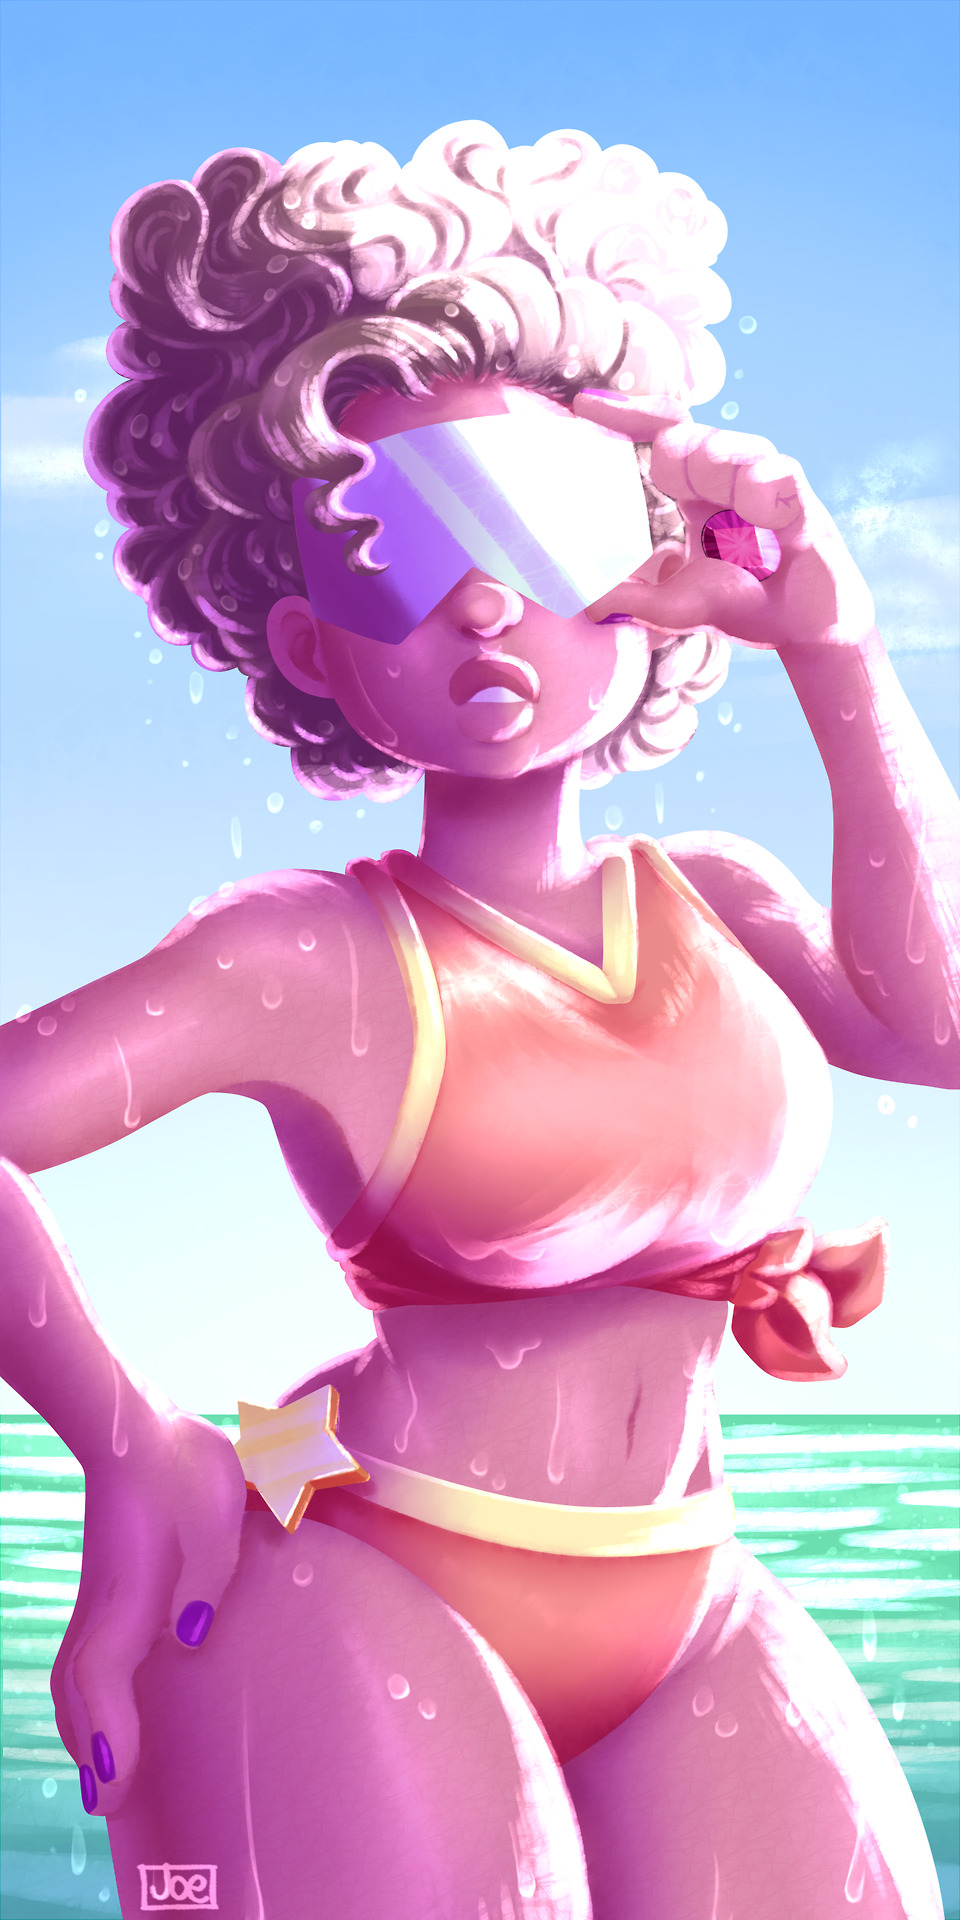 I needed an excuse to practice illumination and water on a body. And Garnet was a perfect option! ^^